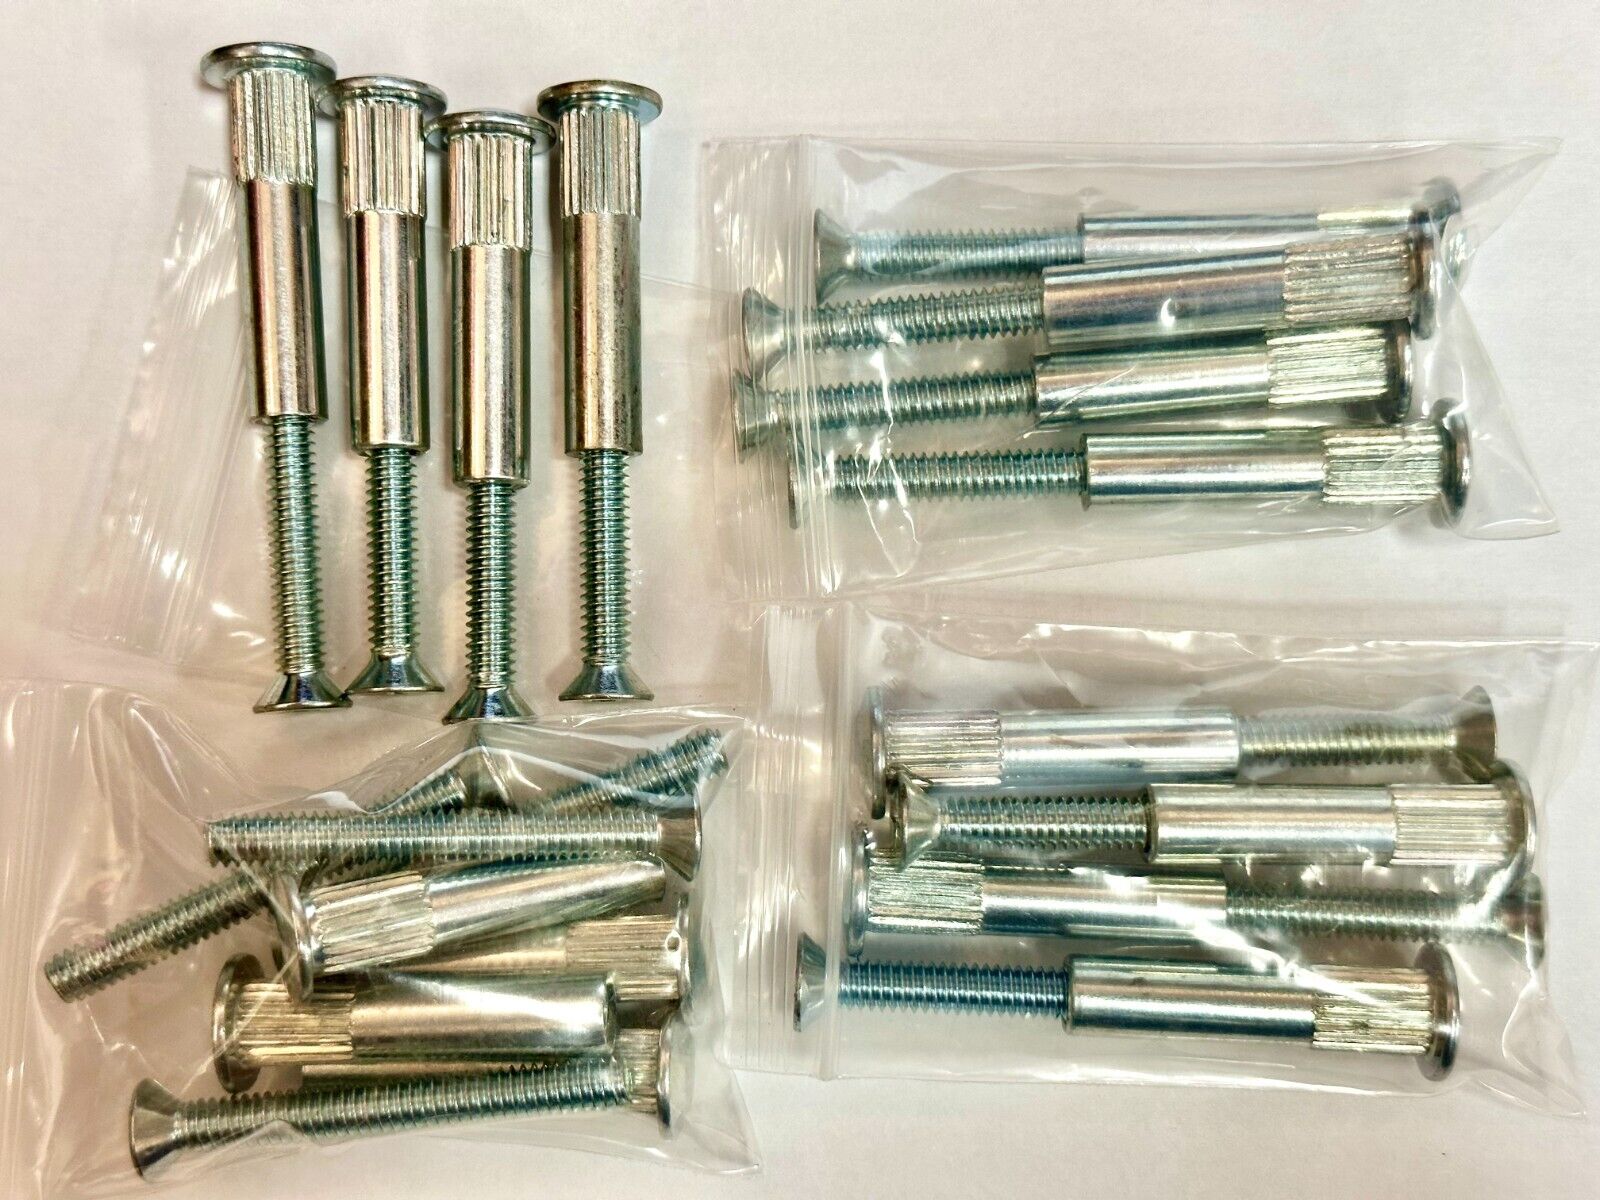 4 BAGS* NEW THRU-BOLT / SEX BOLTS,1/4-20,DOOR CLOSERS KIT,4PC WITH 2IN SCREWS 